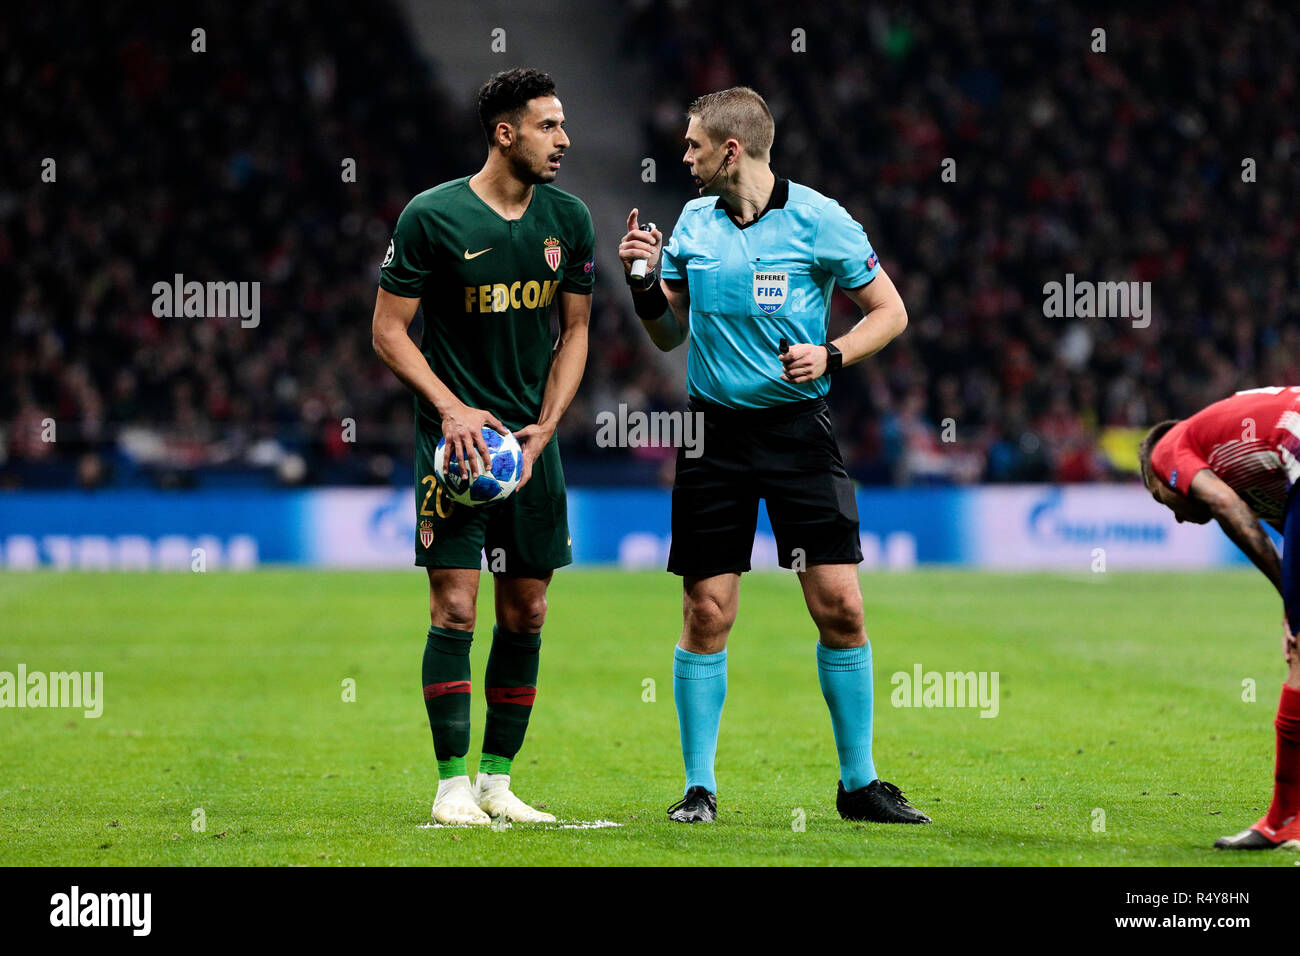 AS Monaco's Nacer Chadli seen speaking with a referee Mattias Gestranius during the UEFA Champions League match between Atletico de Madrid and AS Monaco at the Wanda Metropolitano Stadium in Madrid. ( Final score; Atletico Madrid 2:0 AS monaco) Stock Photo